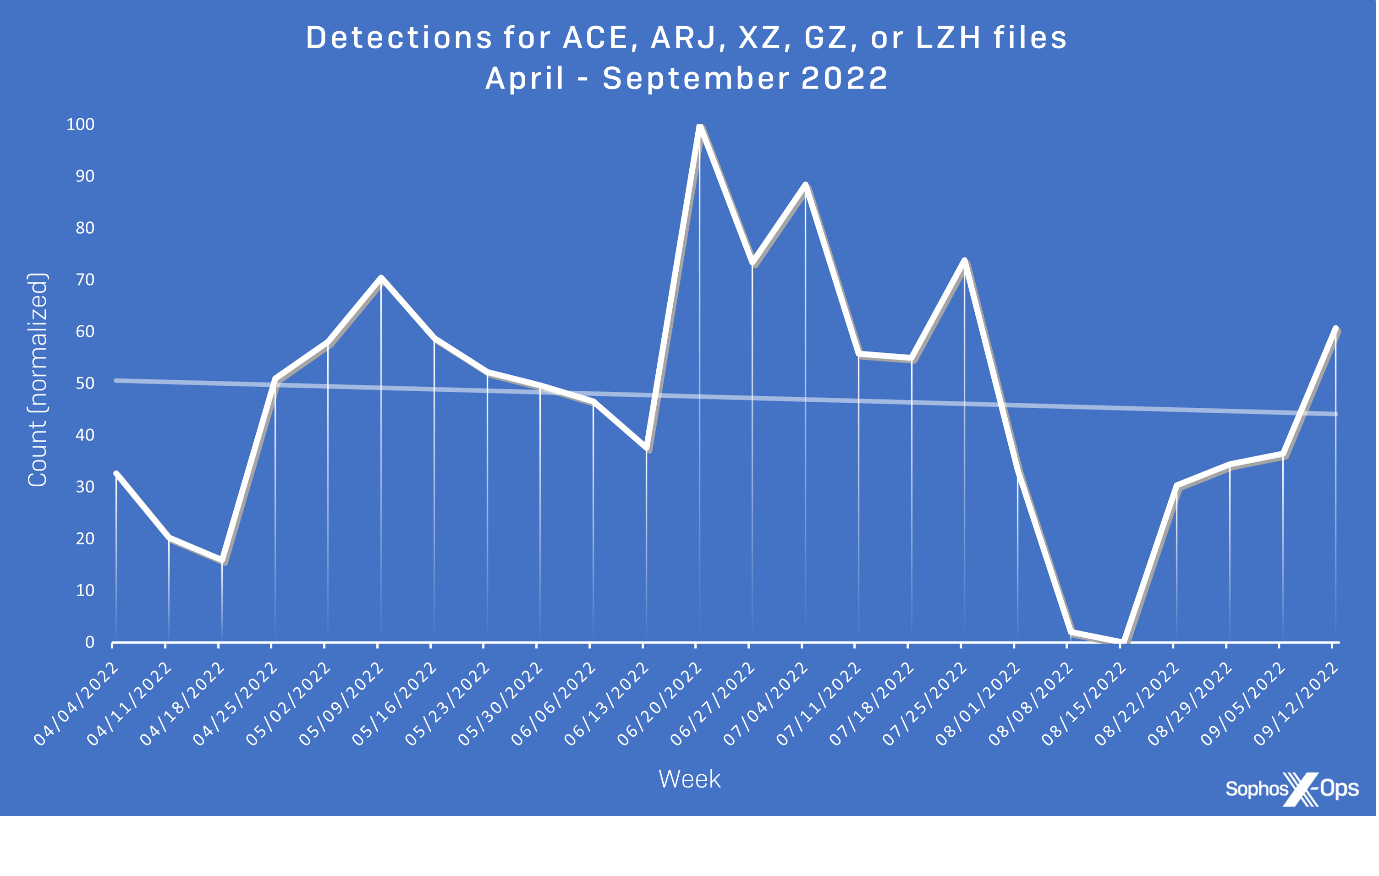 A line graph showing detections for obscure archive types